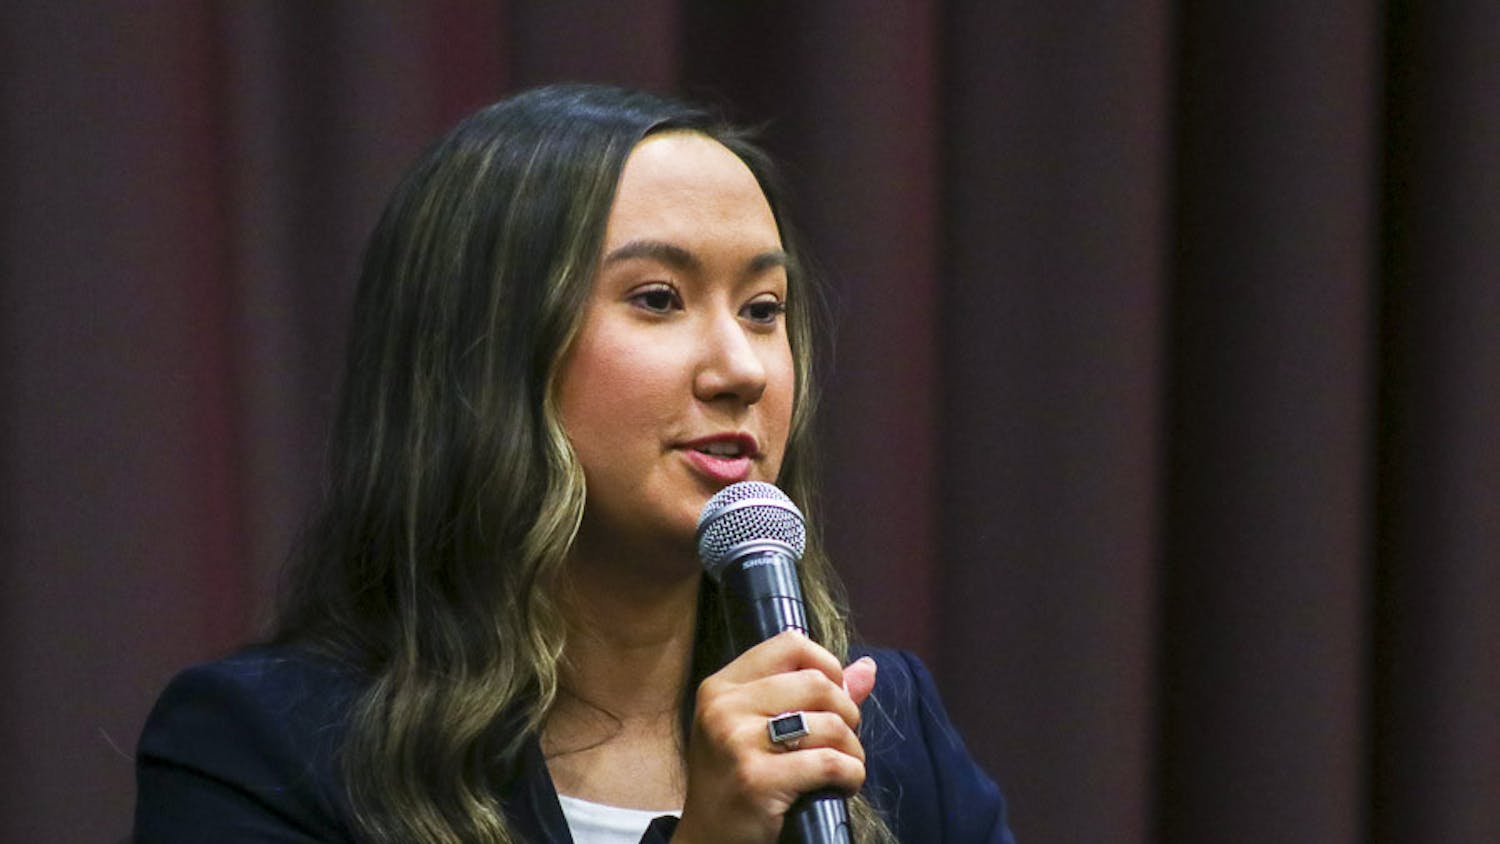 Student Body President-elect Emily “Emmie” Thompson answers a question at the Student Government debate on Feb. 15, 2023. She promoted her campaign by advertising “tangible” goals and promises.&nbsp;